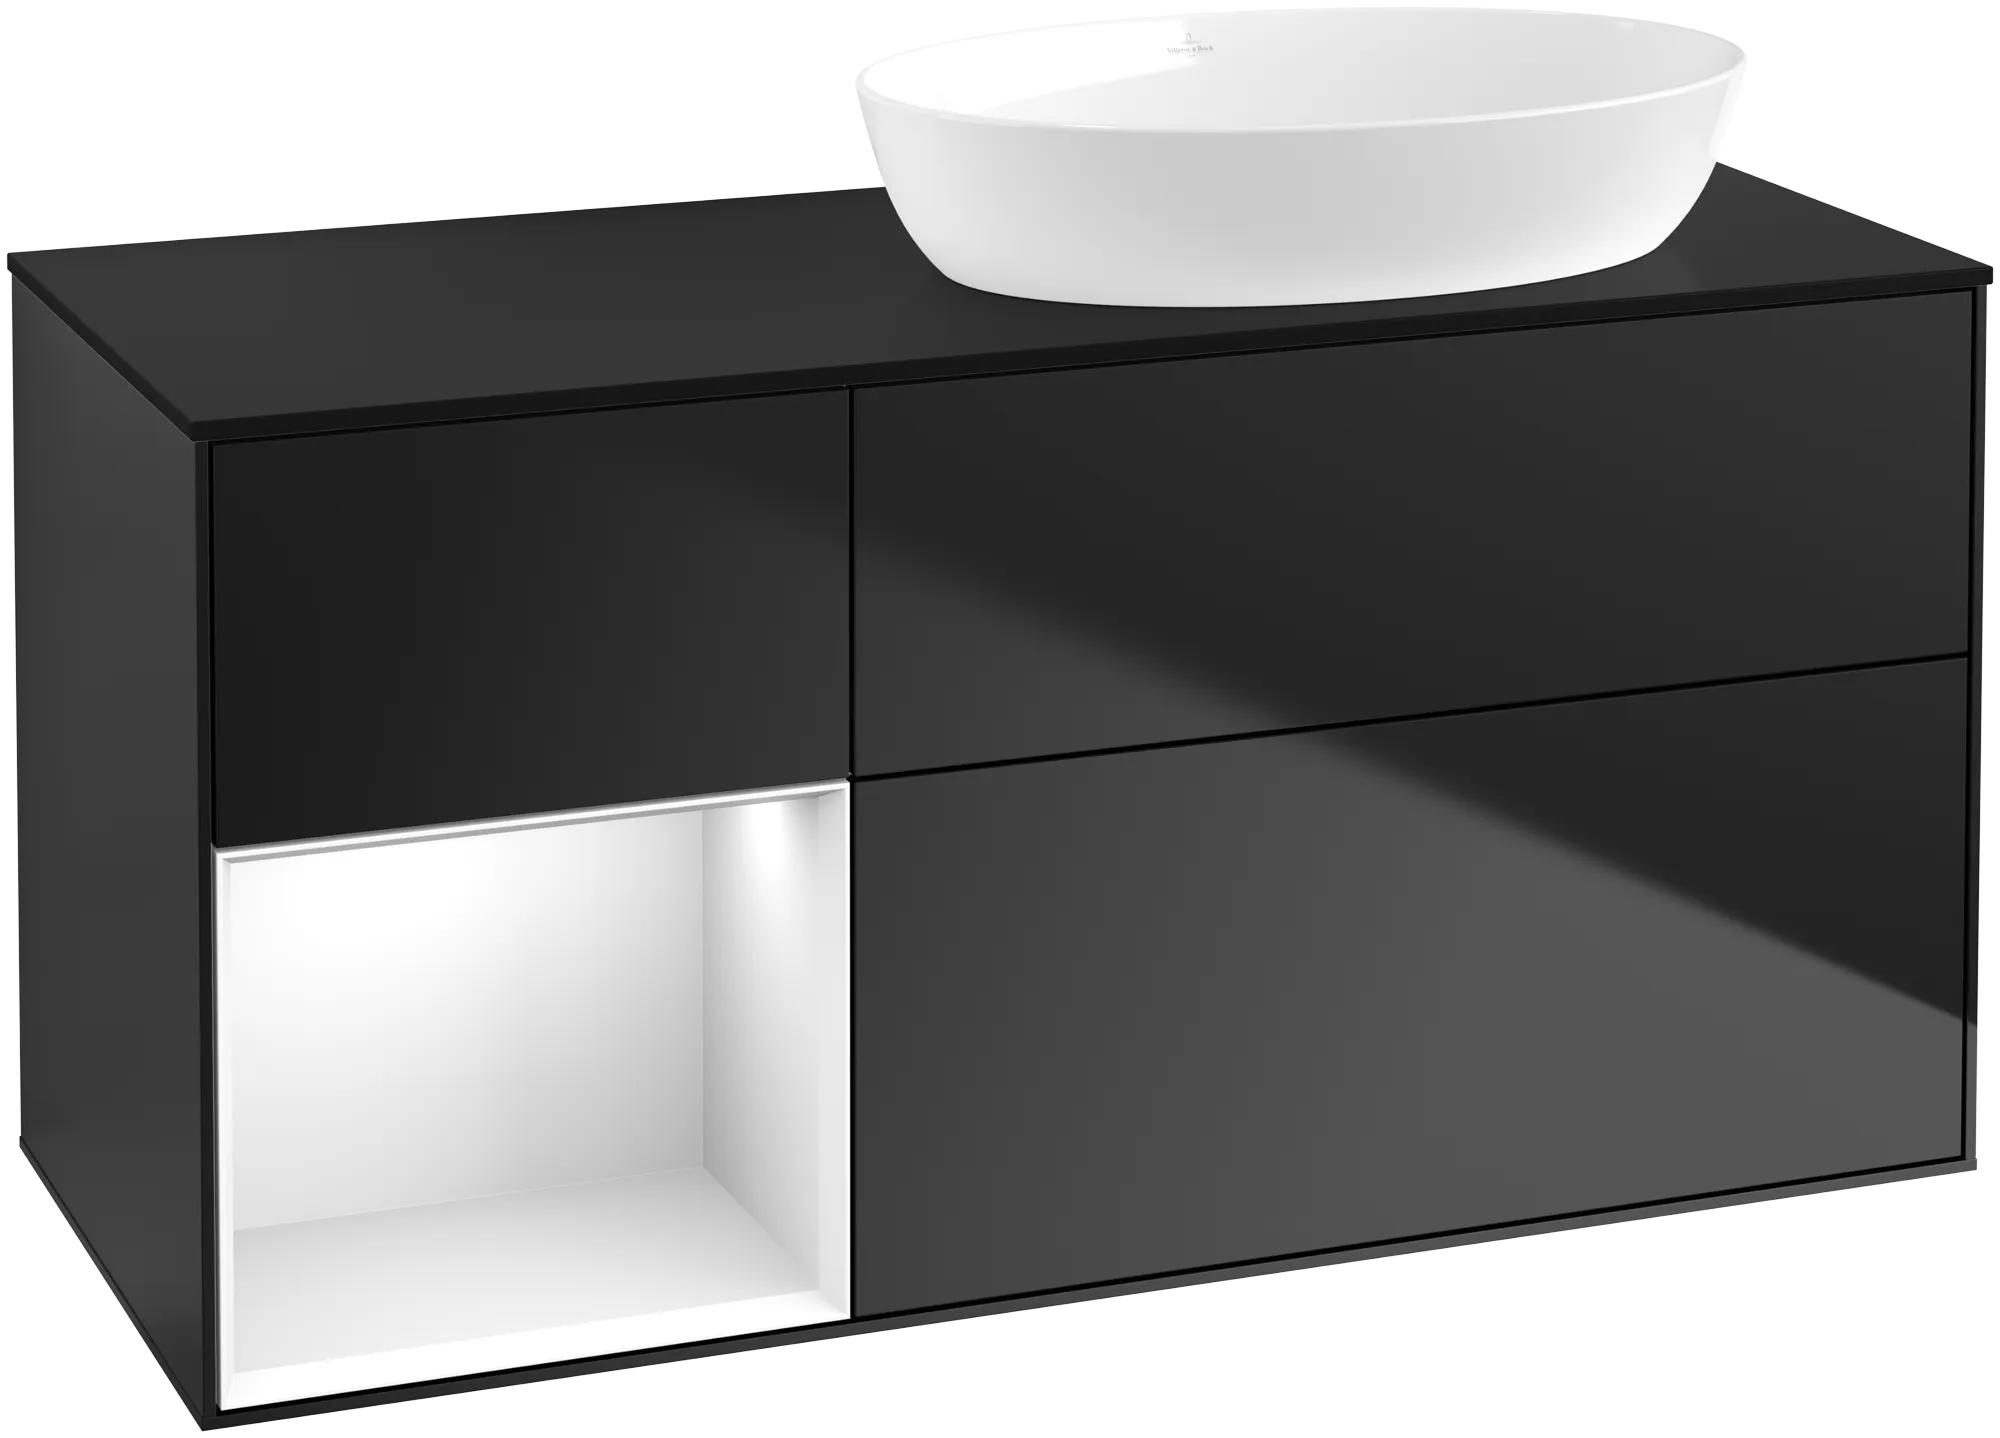 Picture of VILLEROY BOCH Finion Vanity unit, with lighting, 3 pull-out compartments, 1200 x 603 x 501 mm, Black Matt Lacquer / Glossy White Lacquer / Glass Black Matt #GA42GFPD